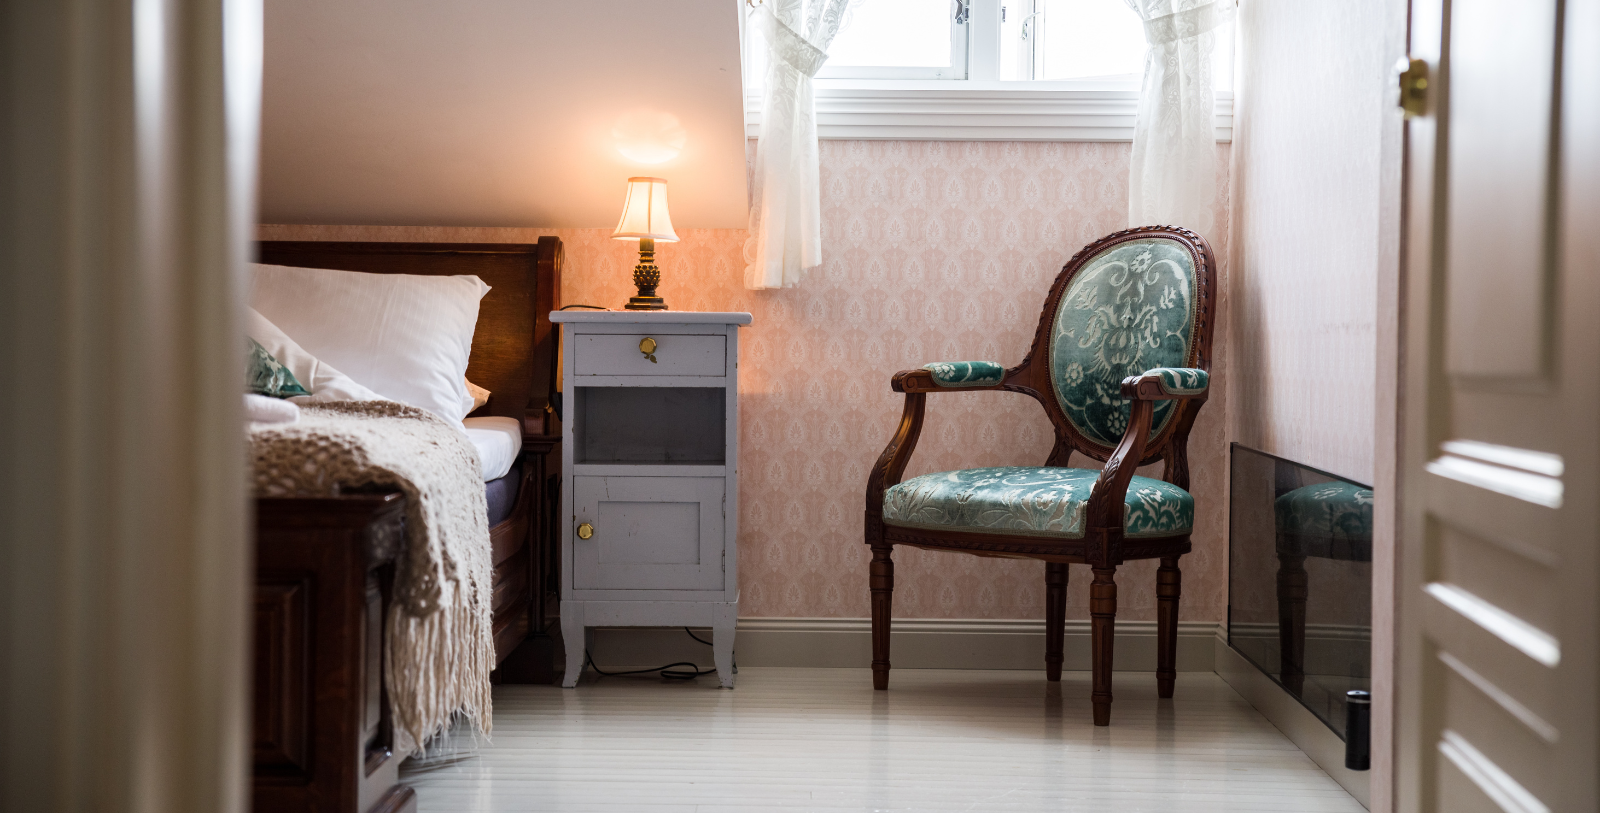 Image of guestroom at Walaker Hotell, 1640, Member of Historic Hotels Worldwide since 2023, in Solvorn, Norway